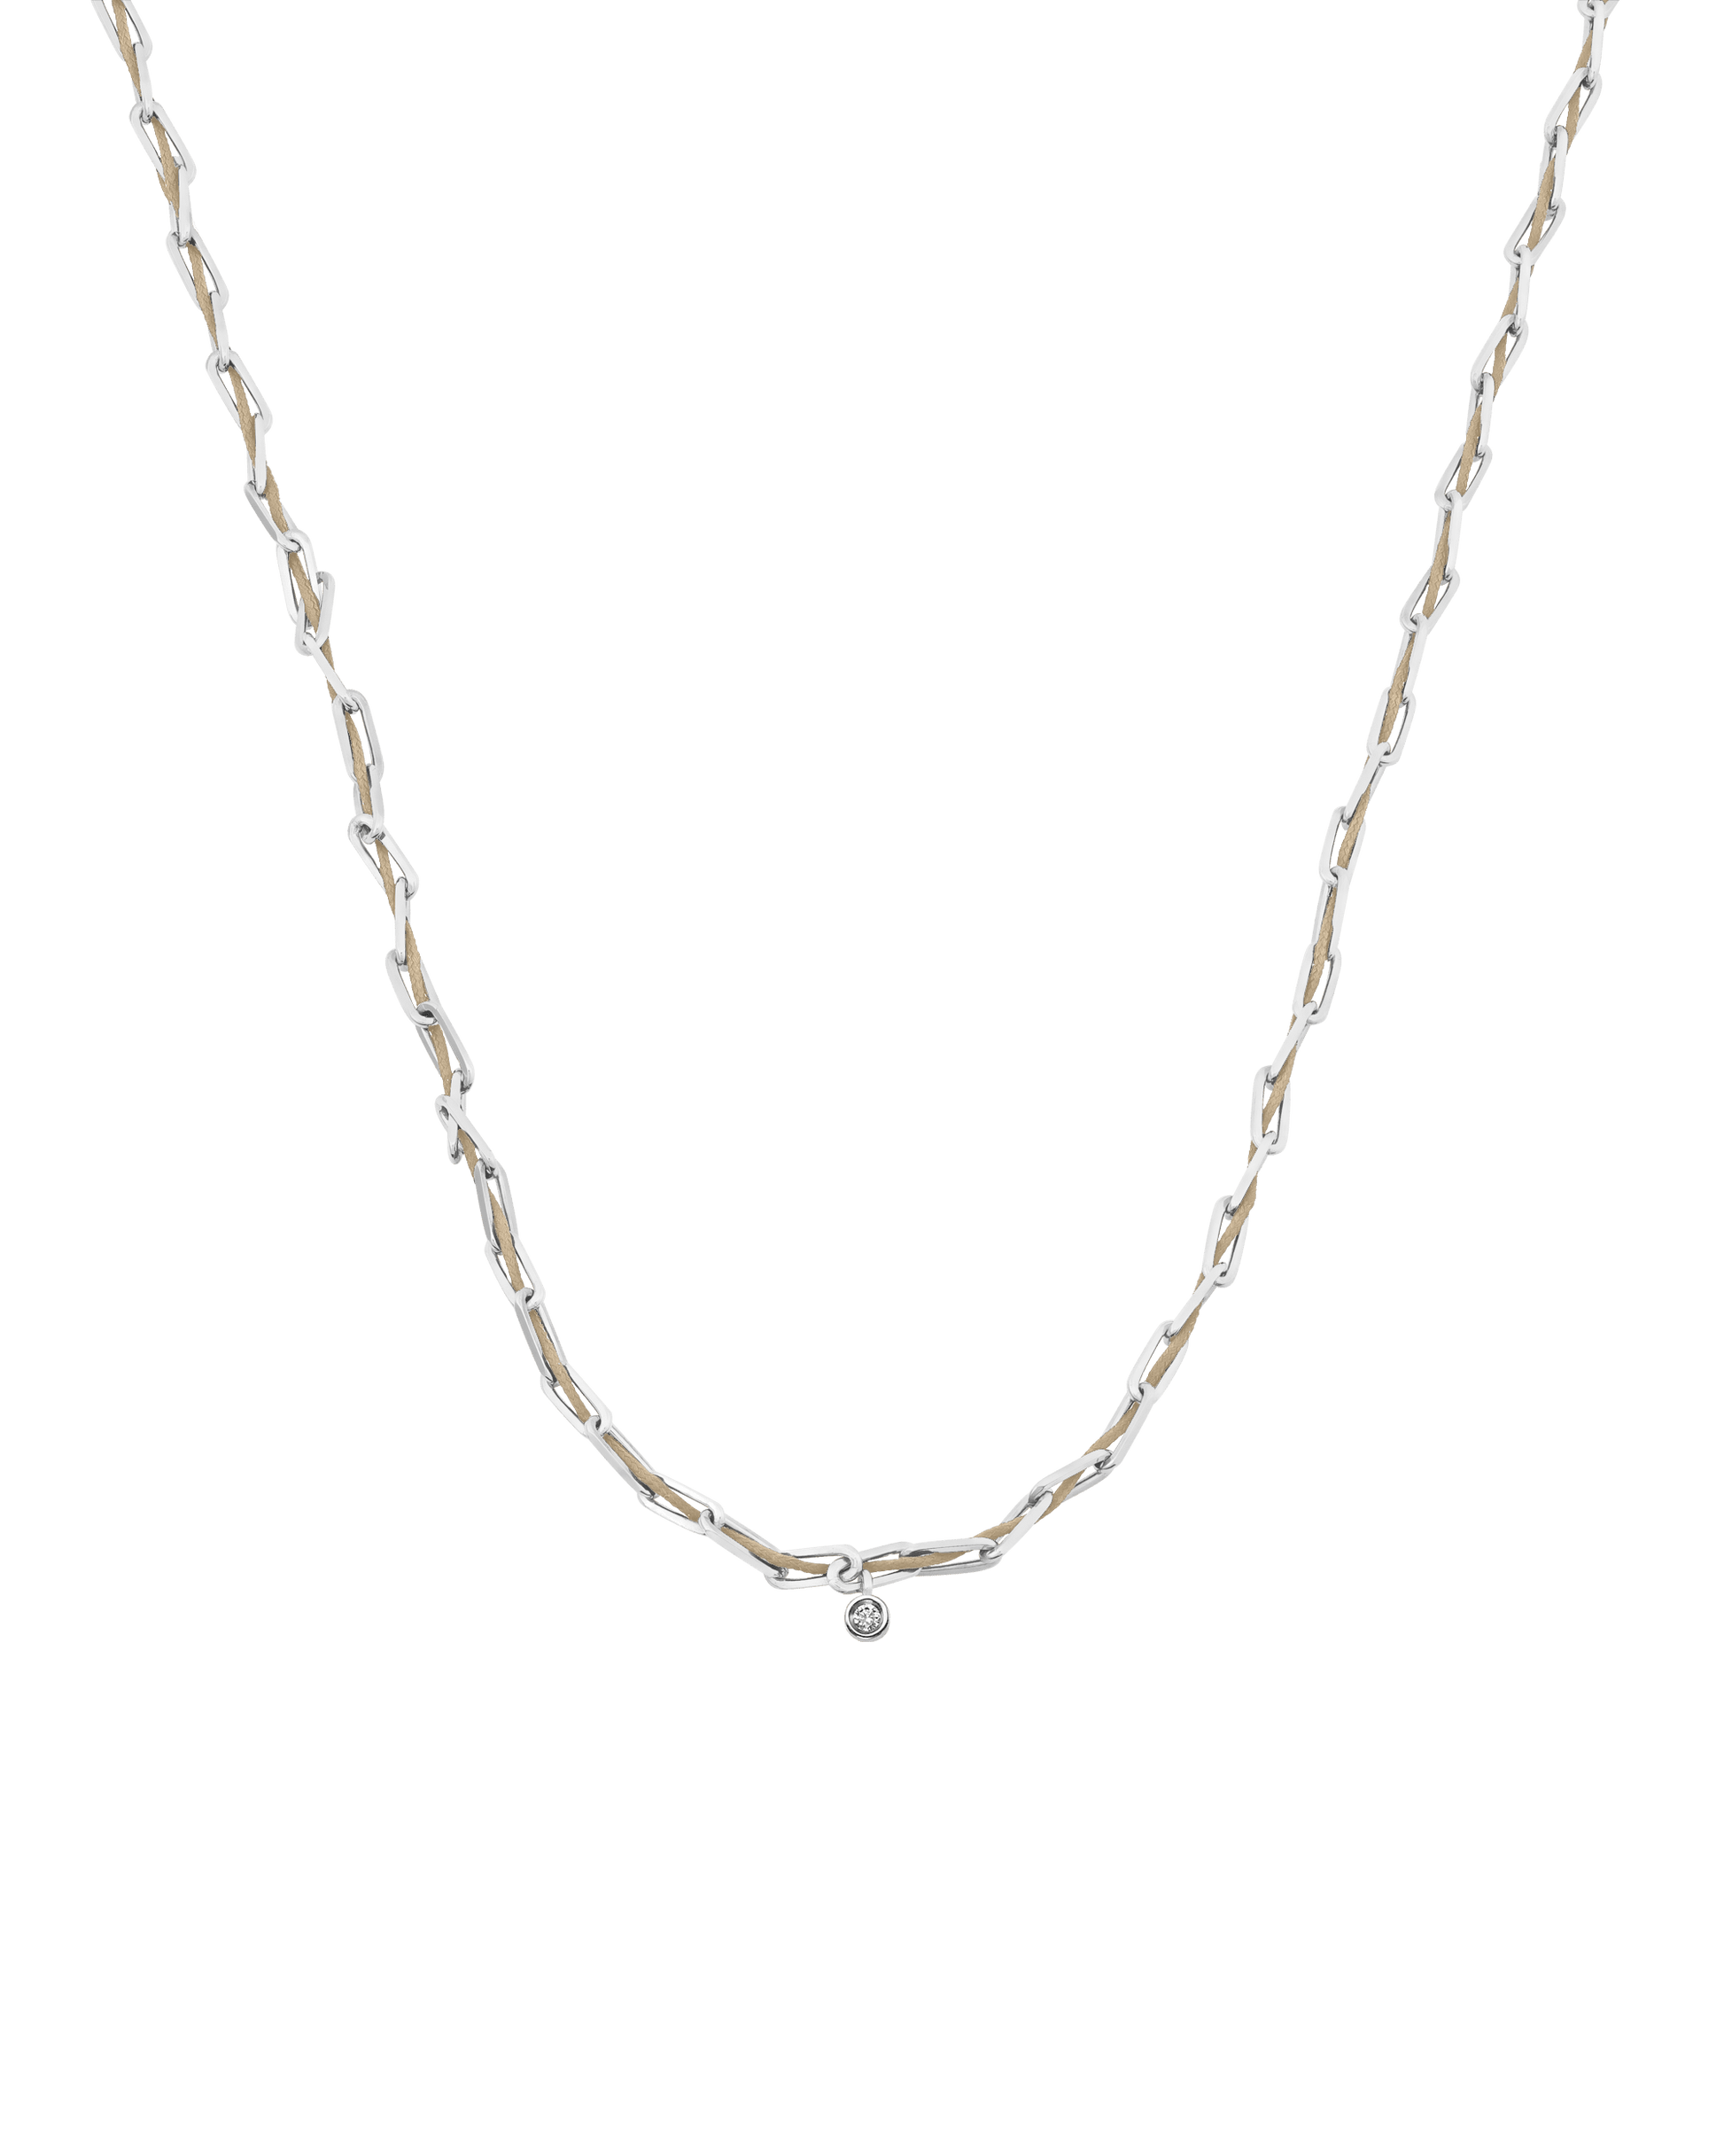 Twine Diamond Necklace - 925 Sterling Silver Necklaces magal-dev Sand Small: 0.03ct 16"